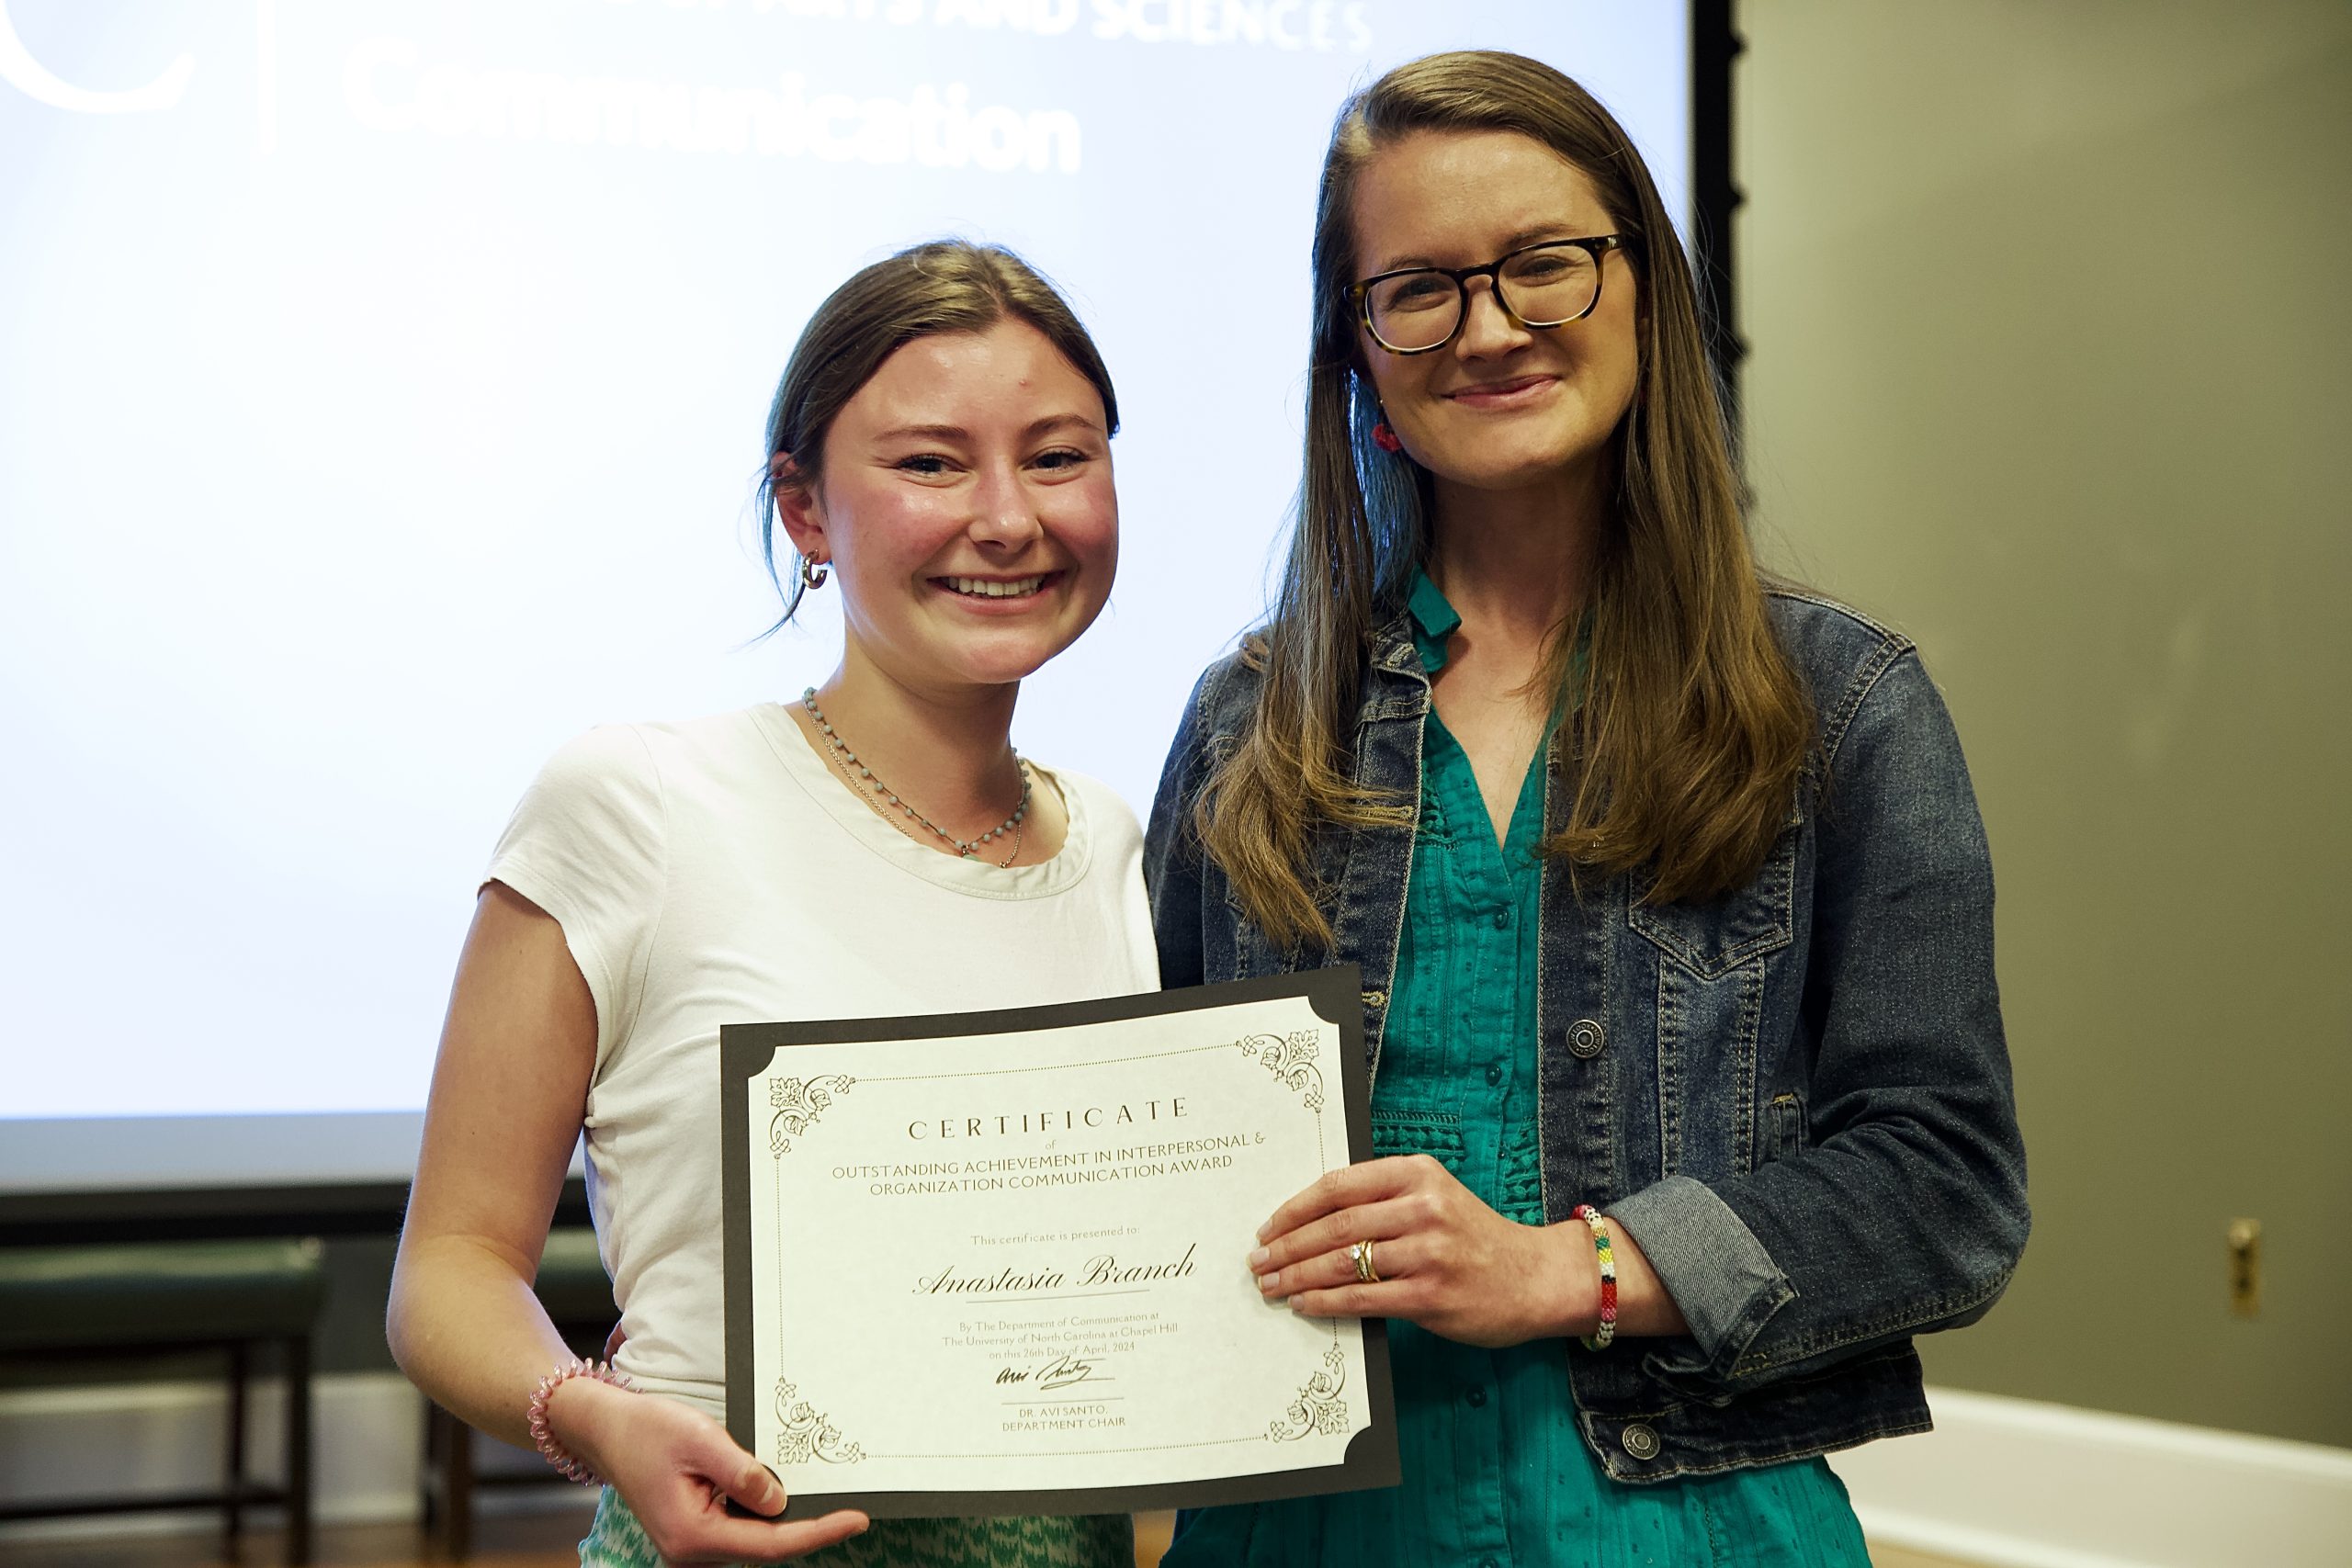 Outstanding Achievement in Interpersonal & Organizational Communication Presented to Anastasia Branch by Megan Fitzmaurice